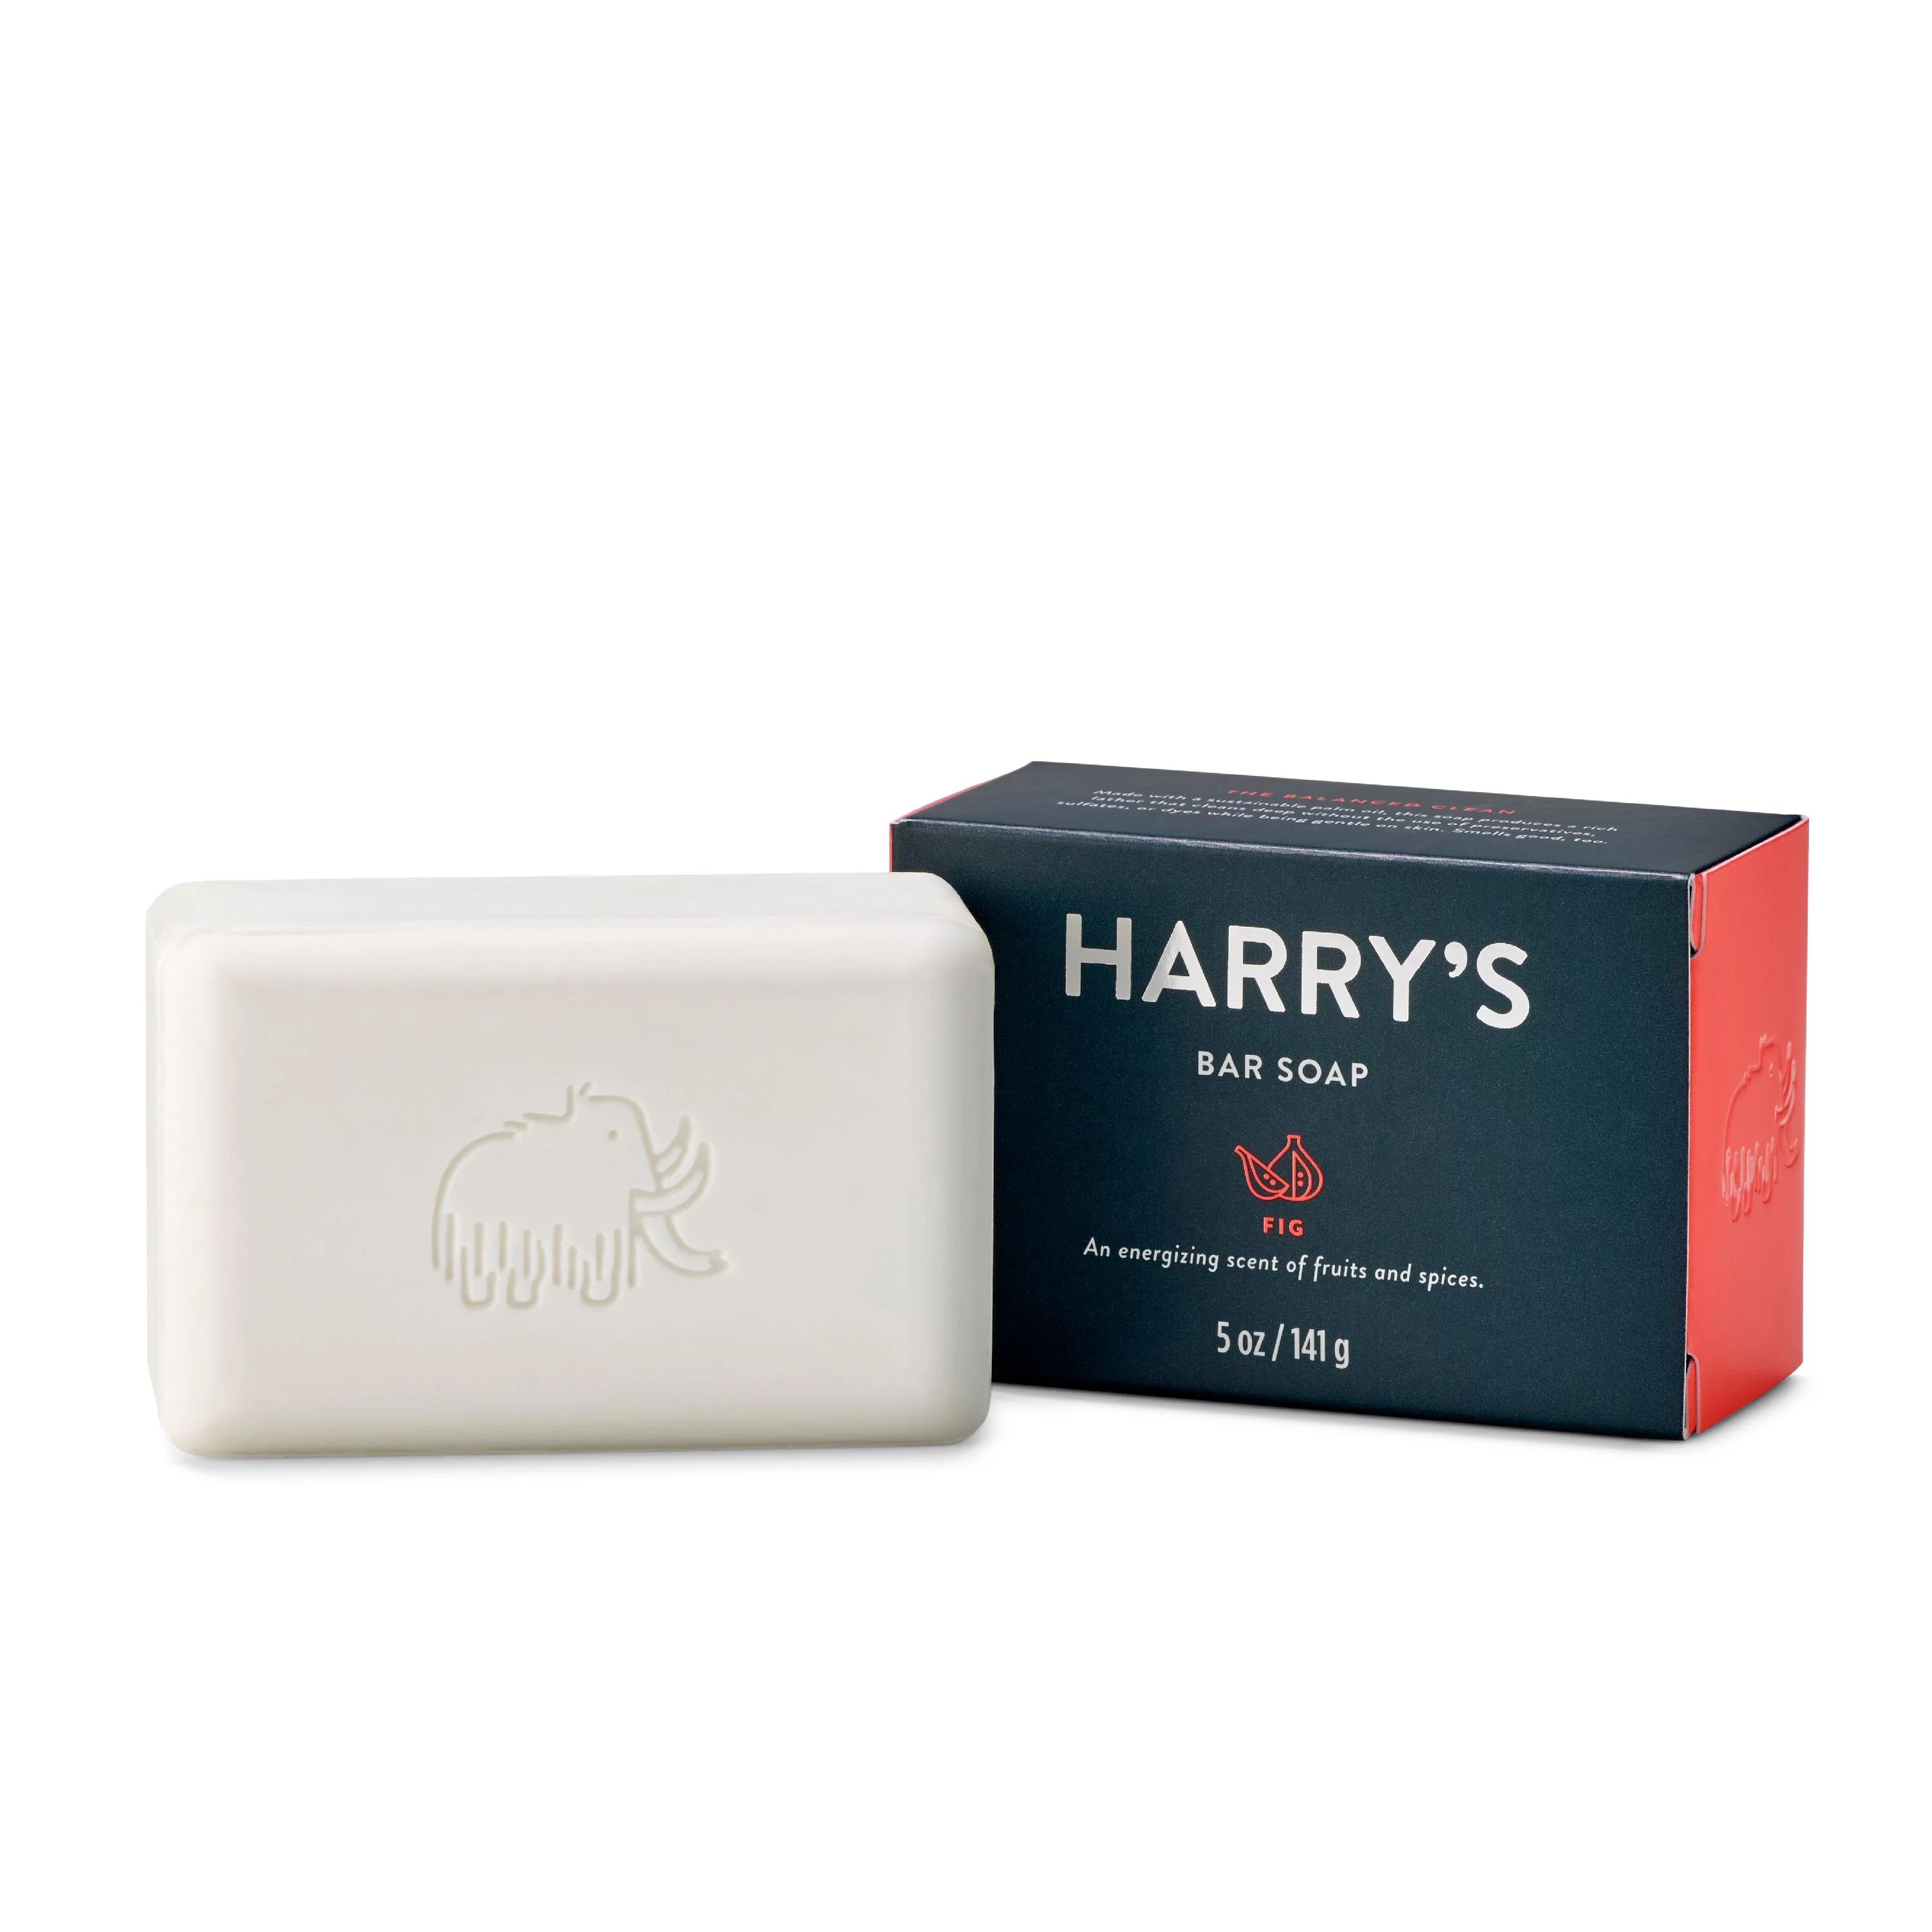 Harry's Bar Soap for Men, Fig Scent with Fruits and Spices, 5 oz, 141 g | Walmart (US)